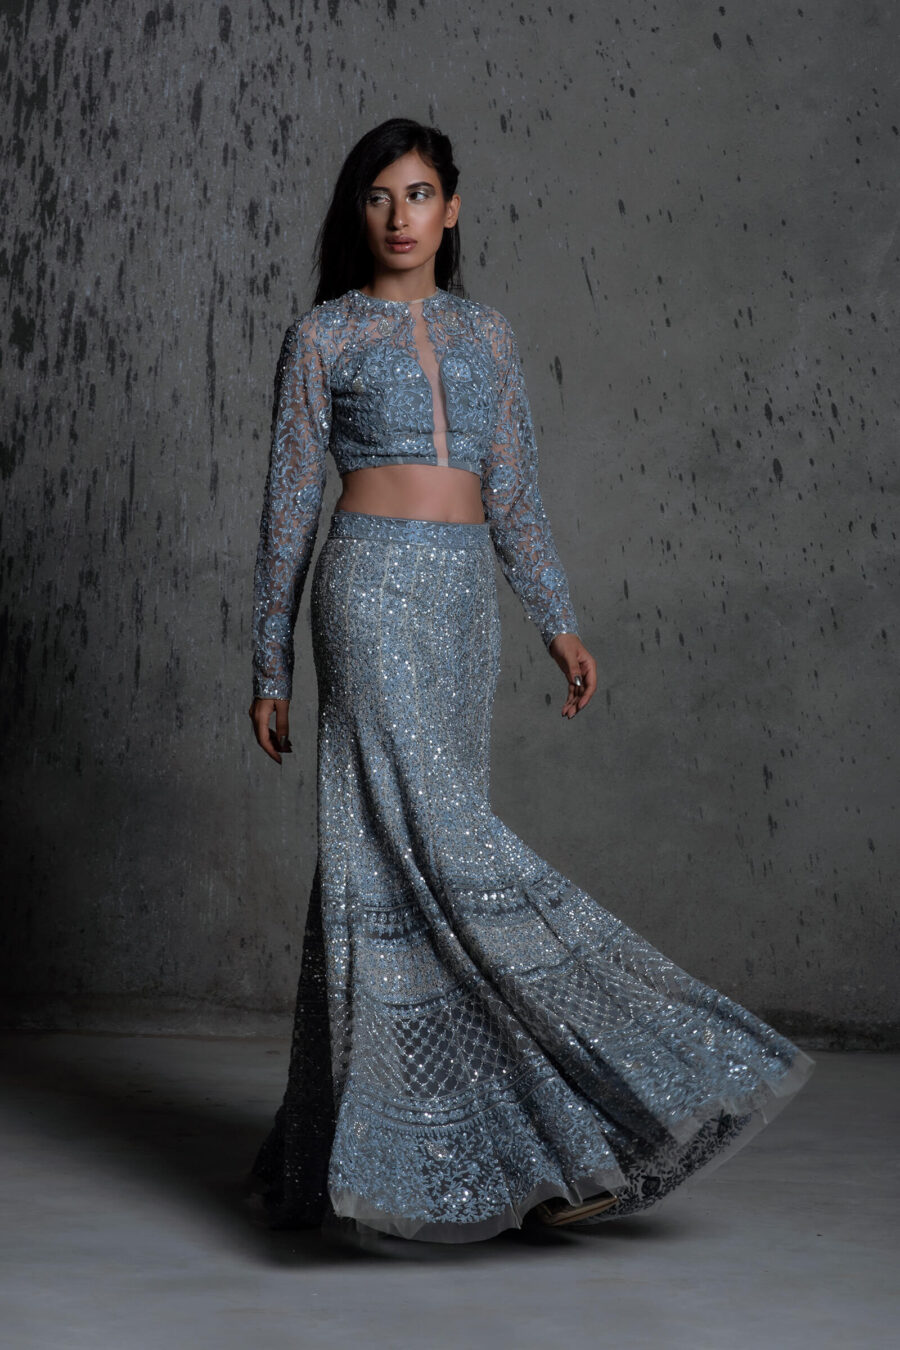 Designers From Whom You Can Score The Midnight Blue Lehenga of Your Dreams!  | WeddingBazaar